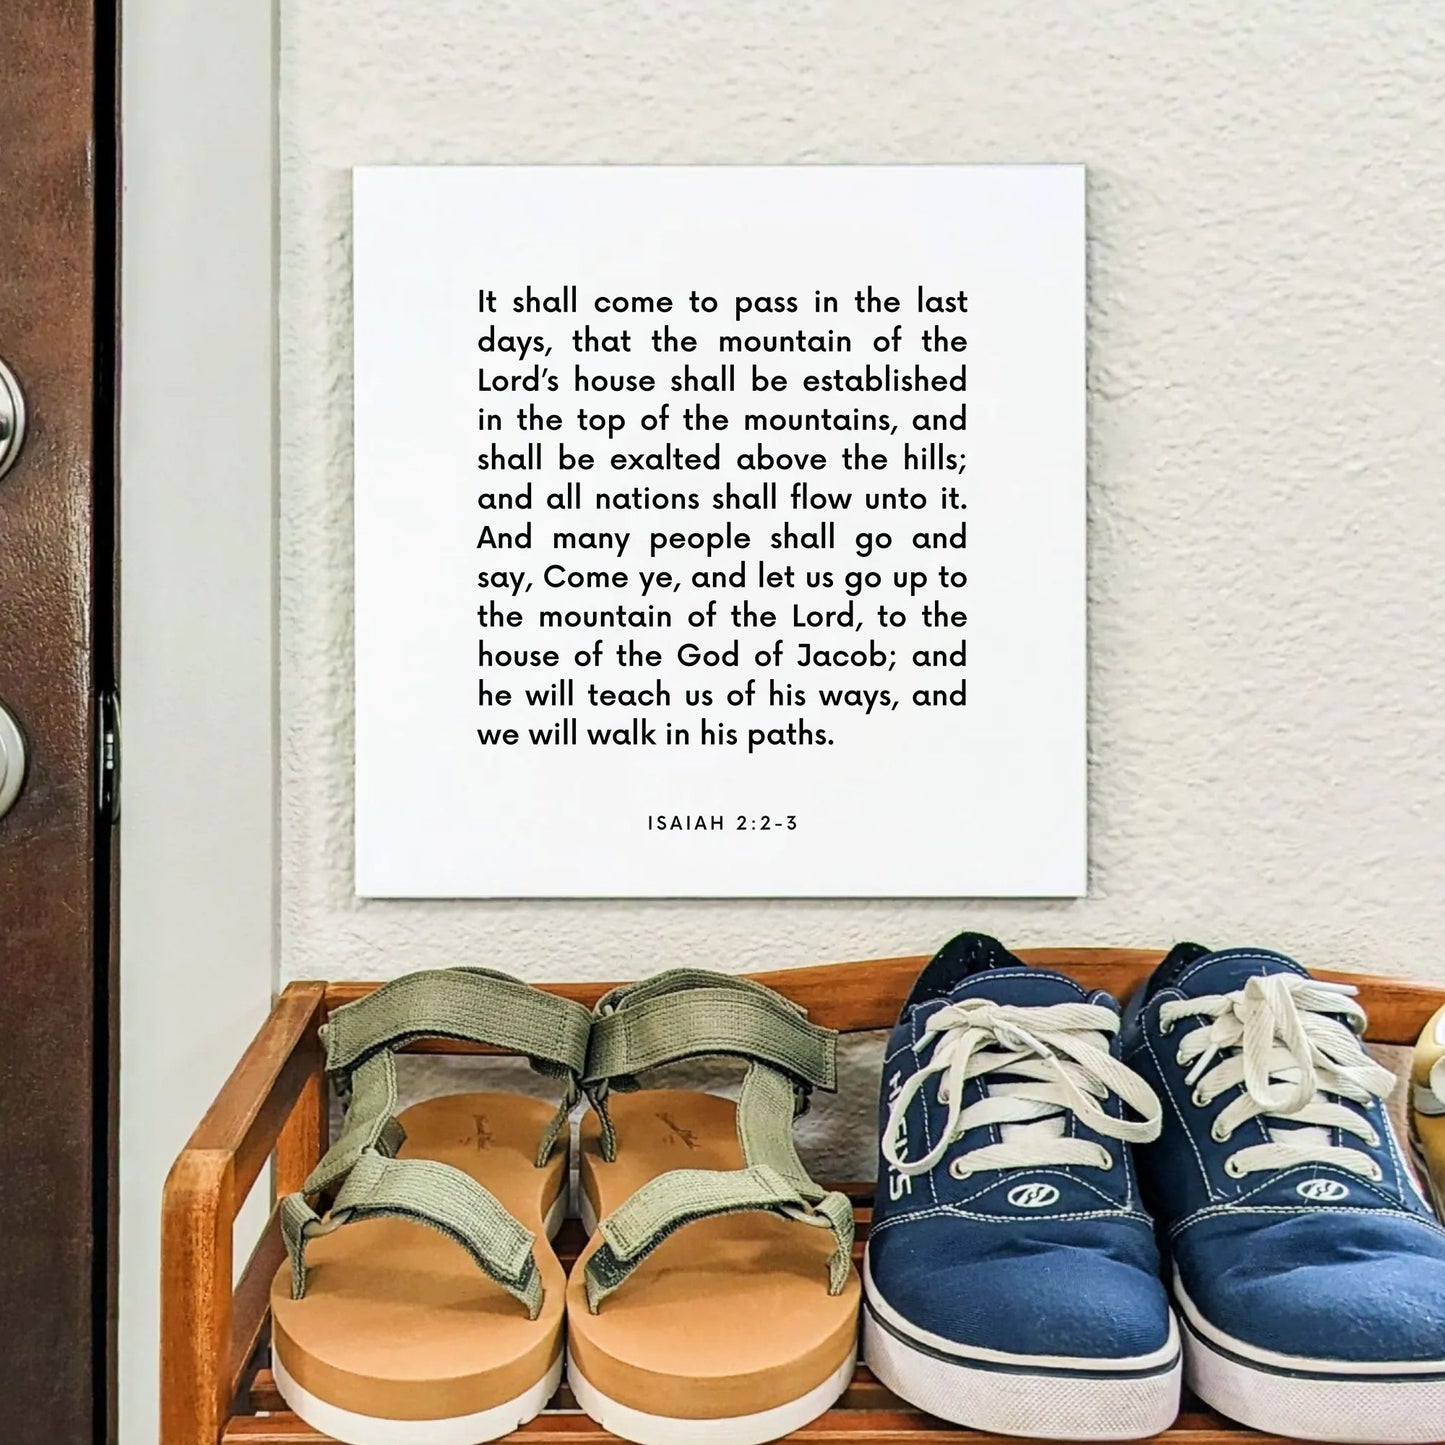 Shoes mouting of the scripture tile for Isaiah 2:2-3 - "He will teach us of his ways, and we will walk in his paths"